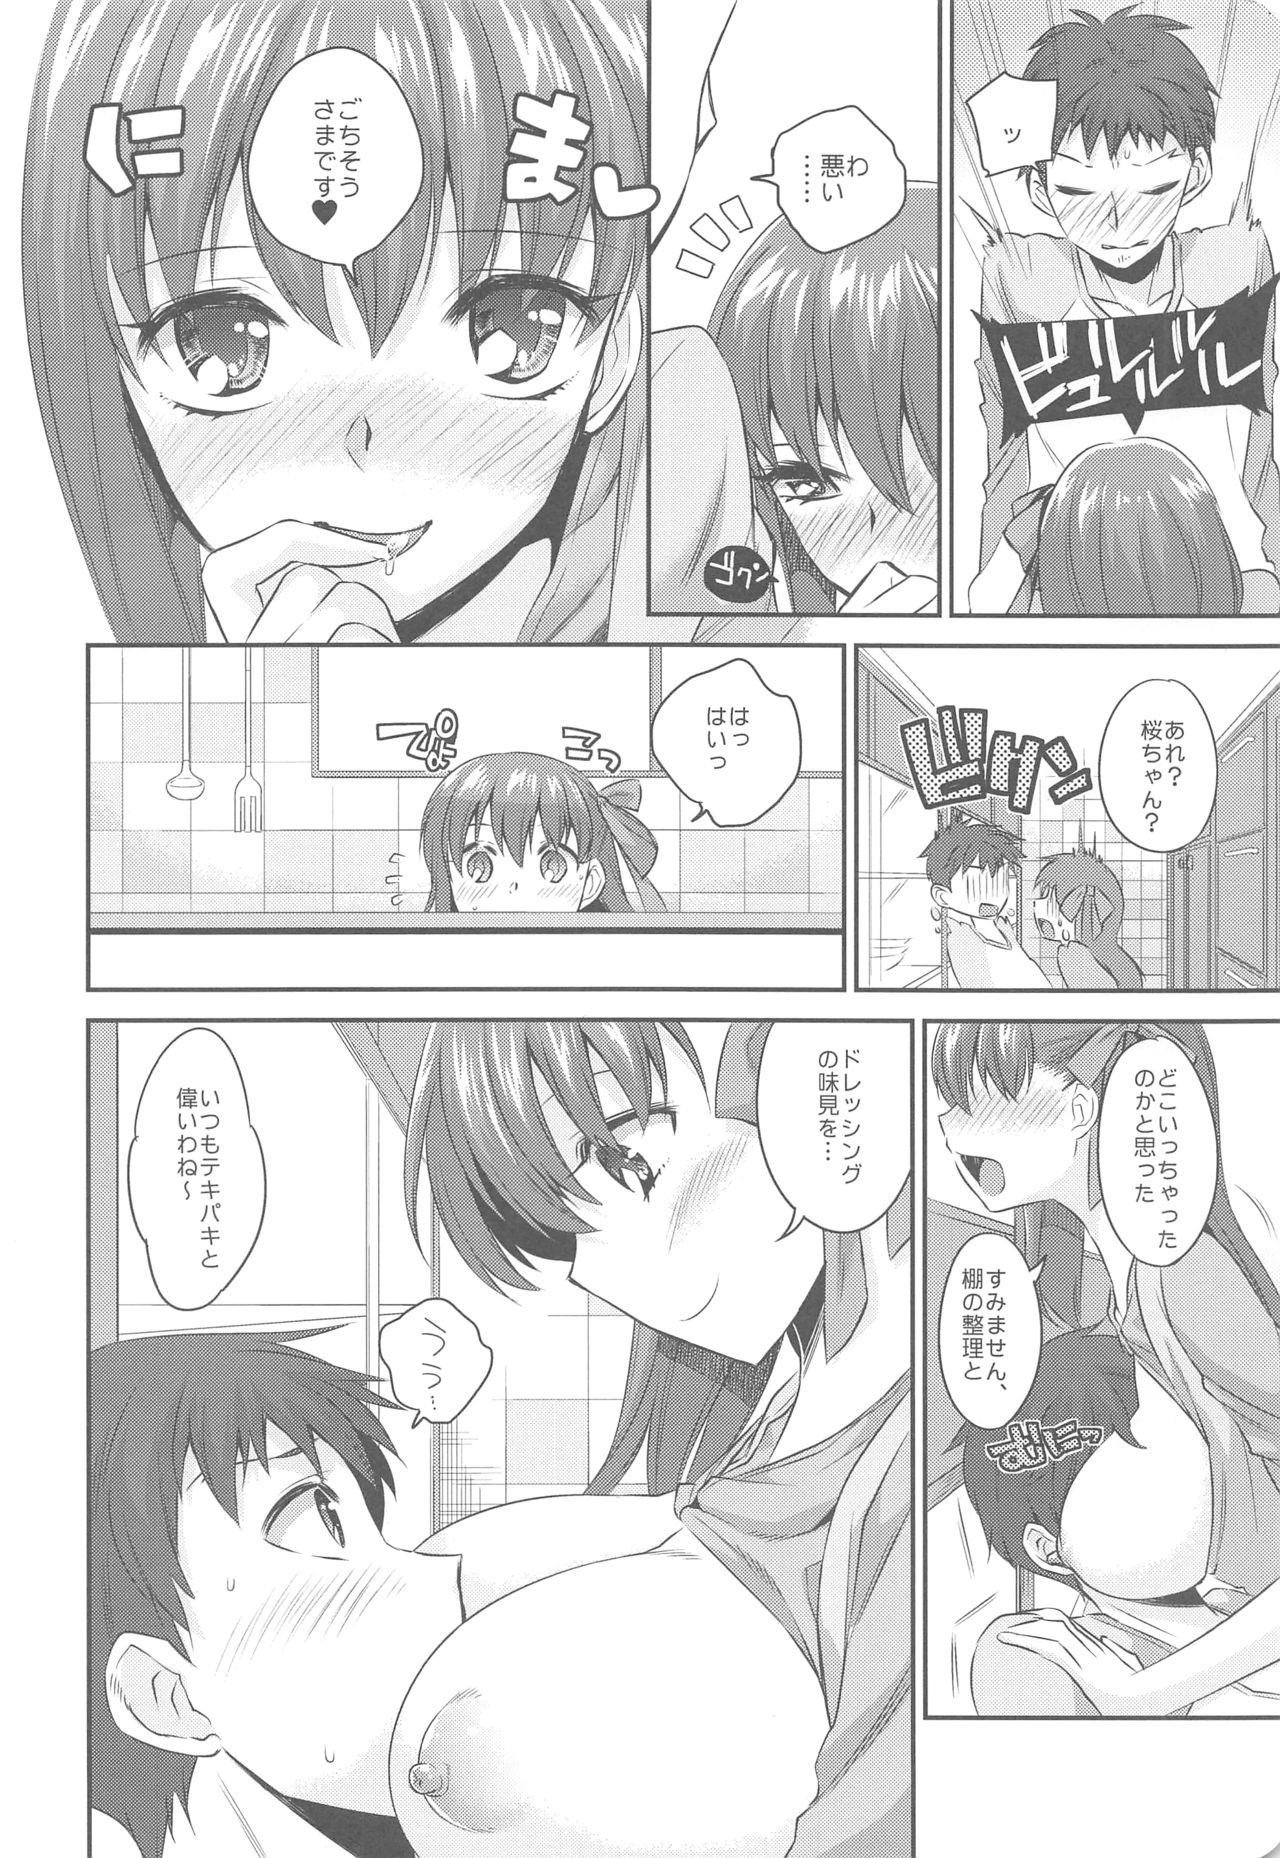 Monster Cock Kitchen H - Fate stay night Friend - Page 8